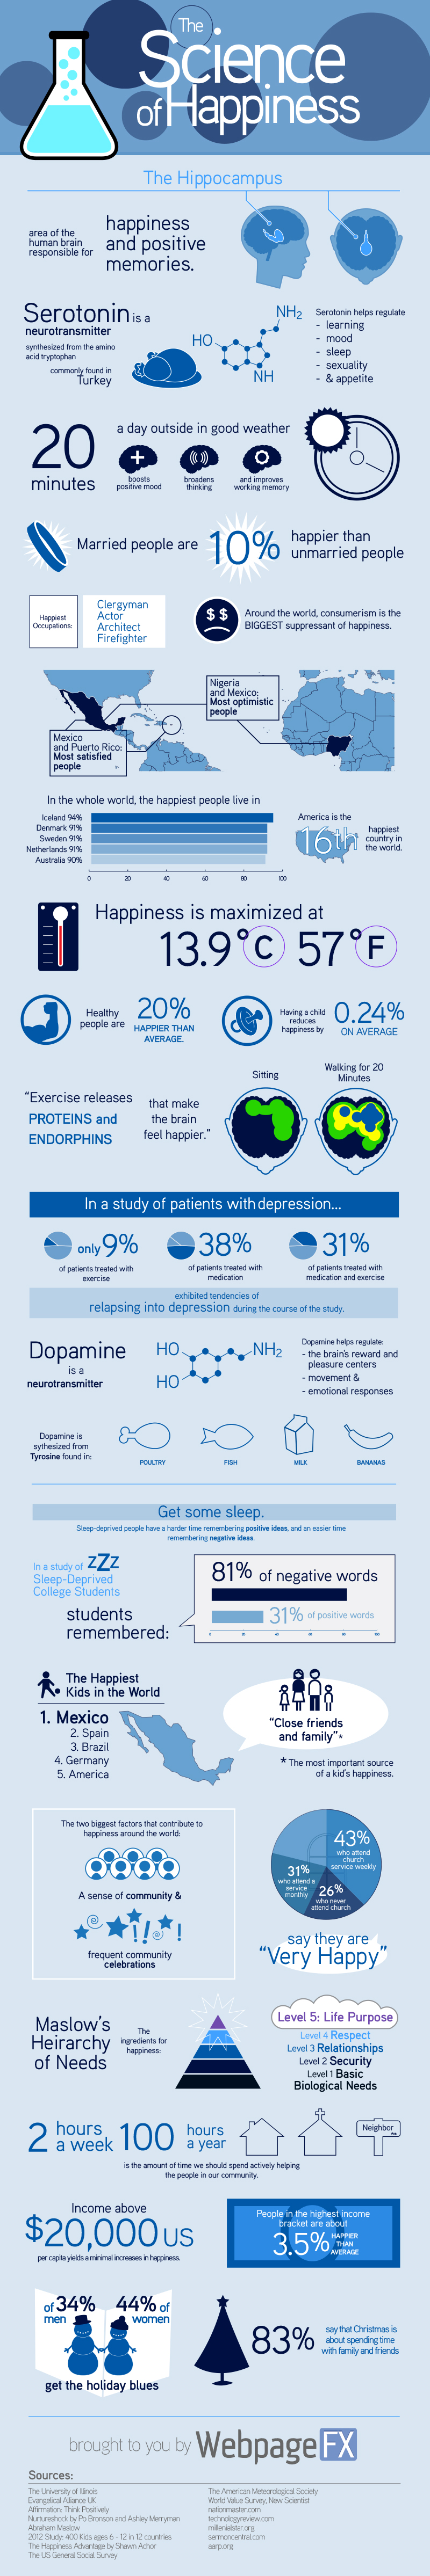 Beverage development article and infographic